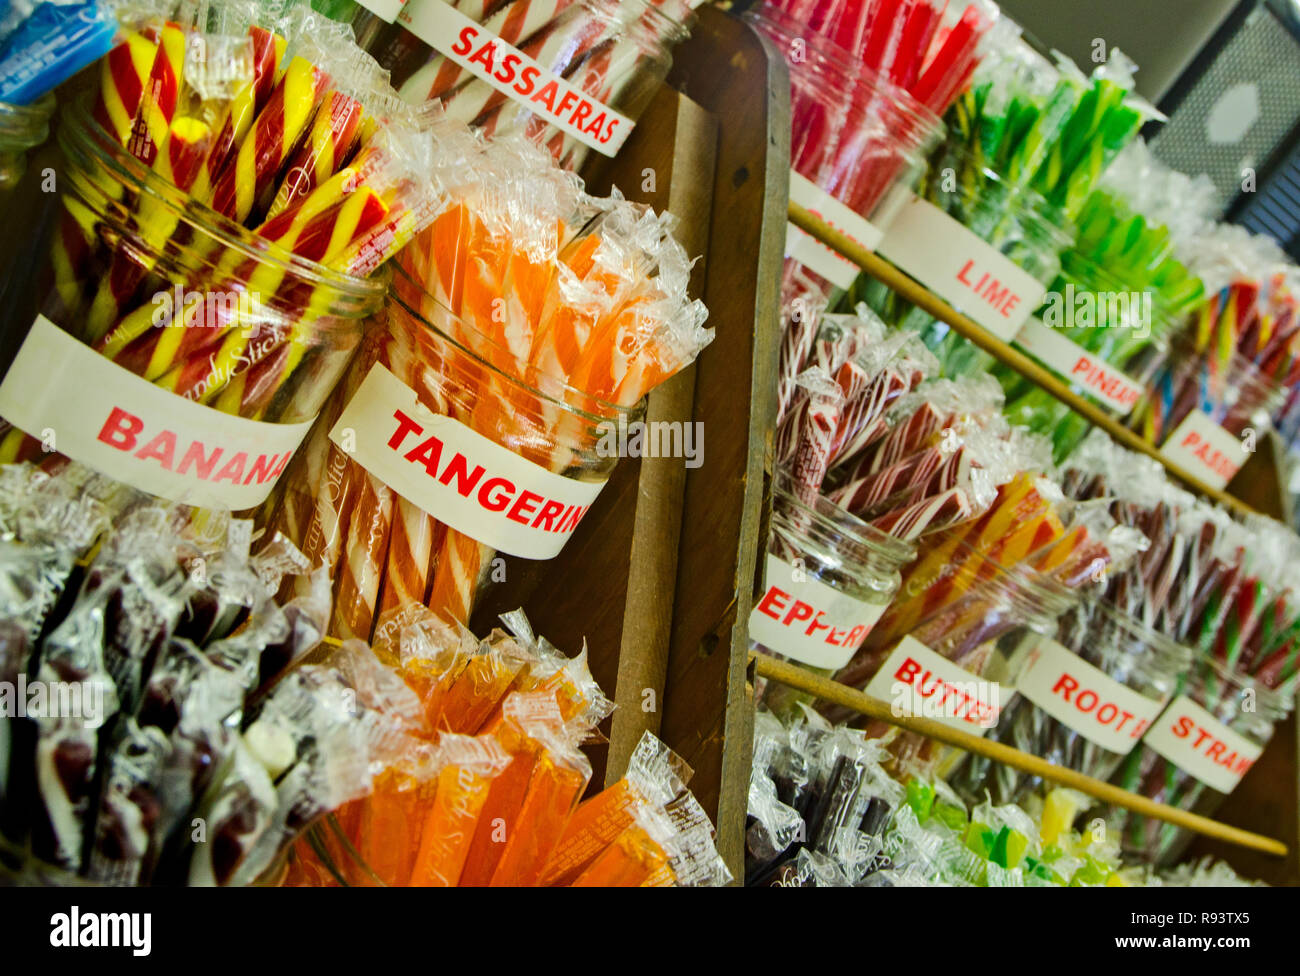 Turnage Drug Store in Water Valley, Mississippi sells a variety of hard-to-find items, including old-fashioned candy sticks. Stock Photo